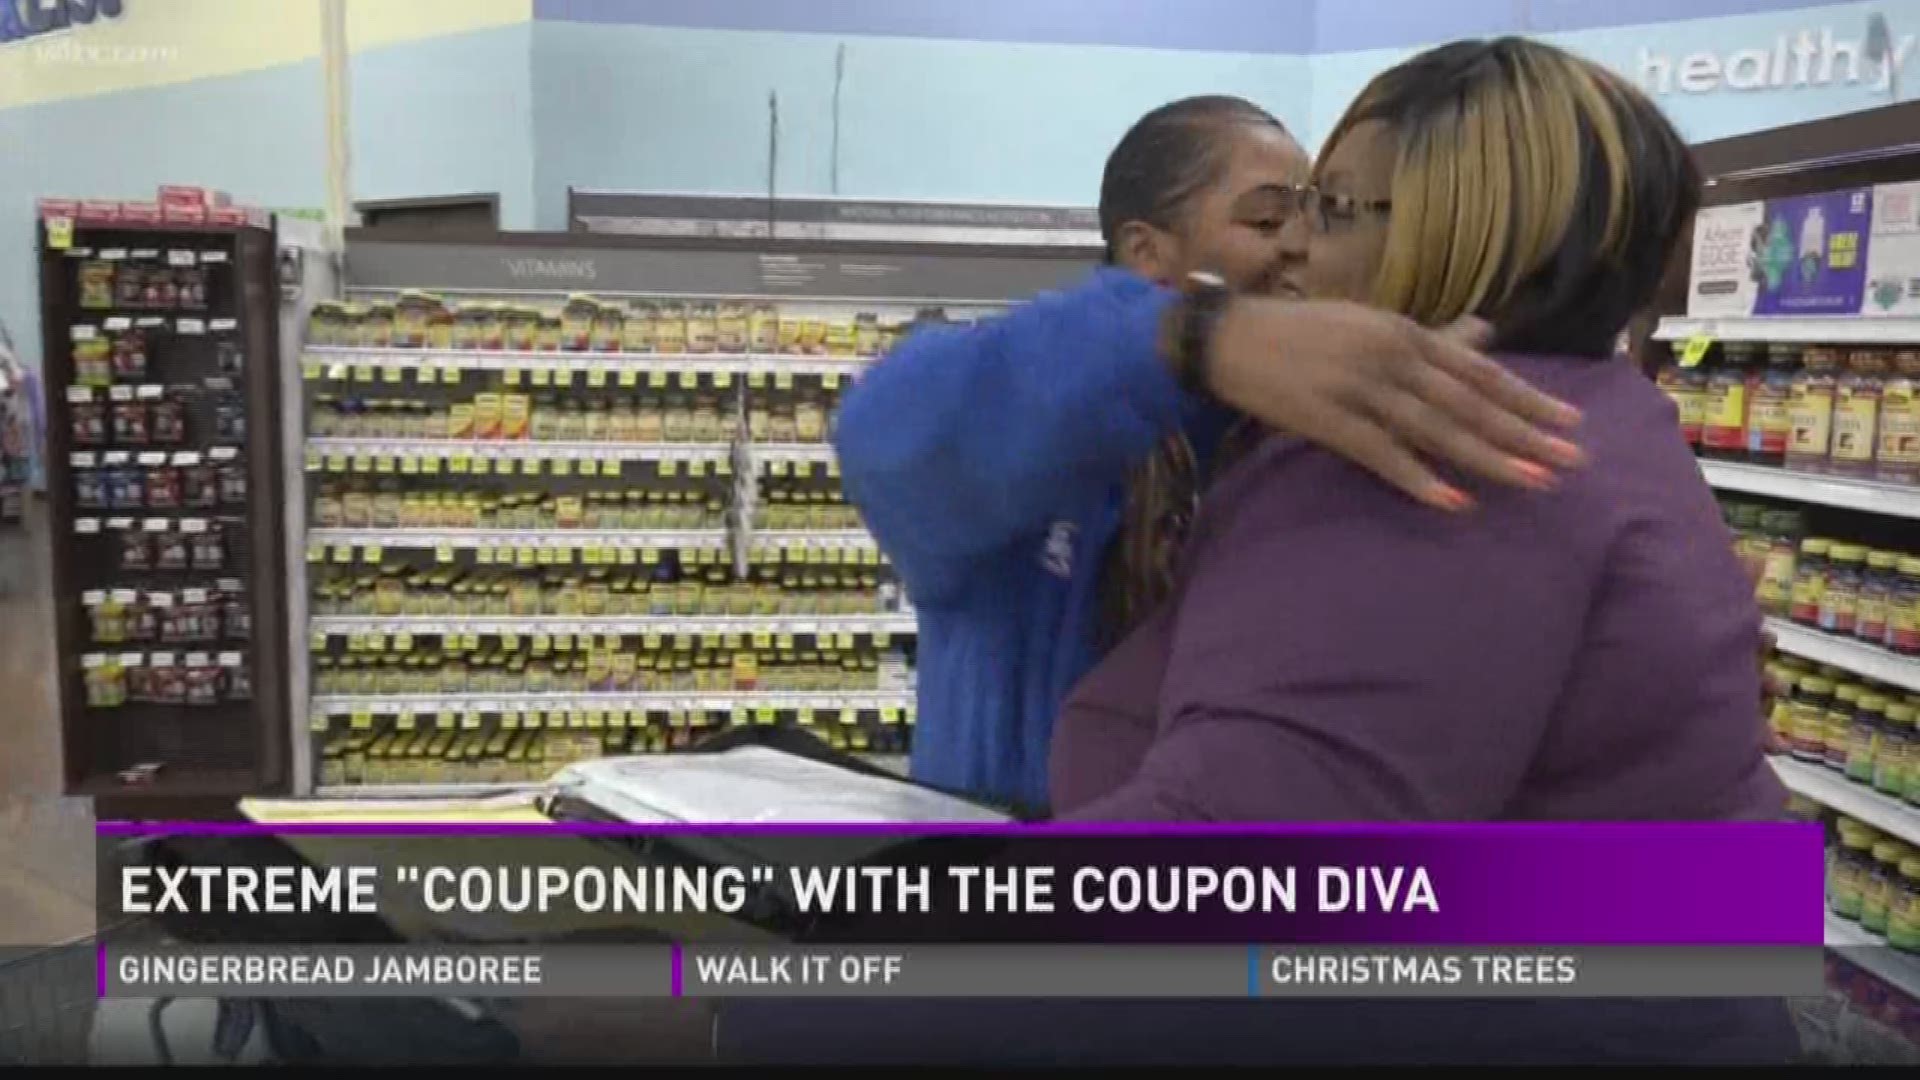 Want to learn how to save?  Check out this coupon diva.